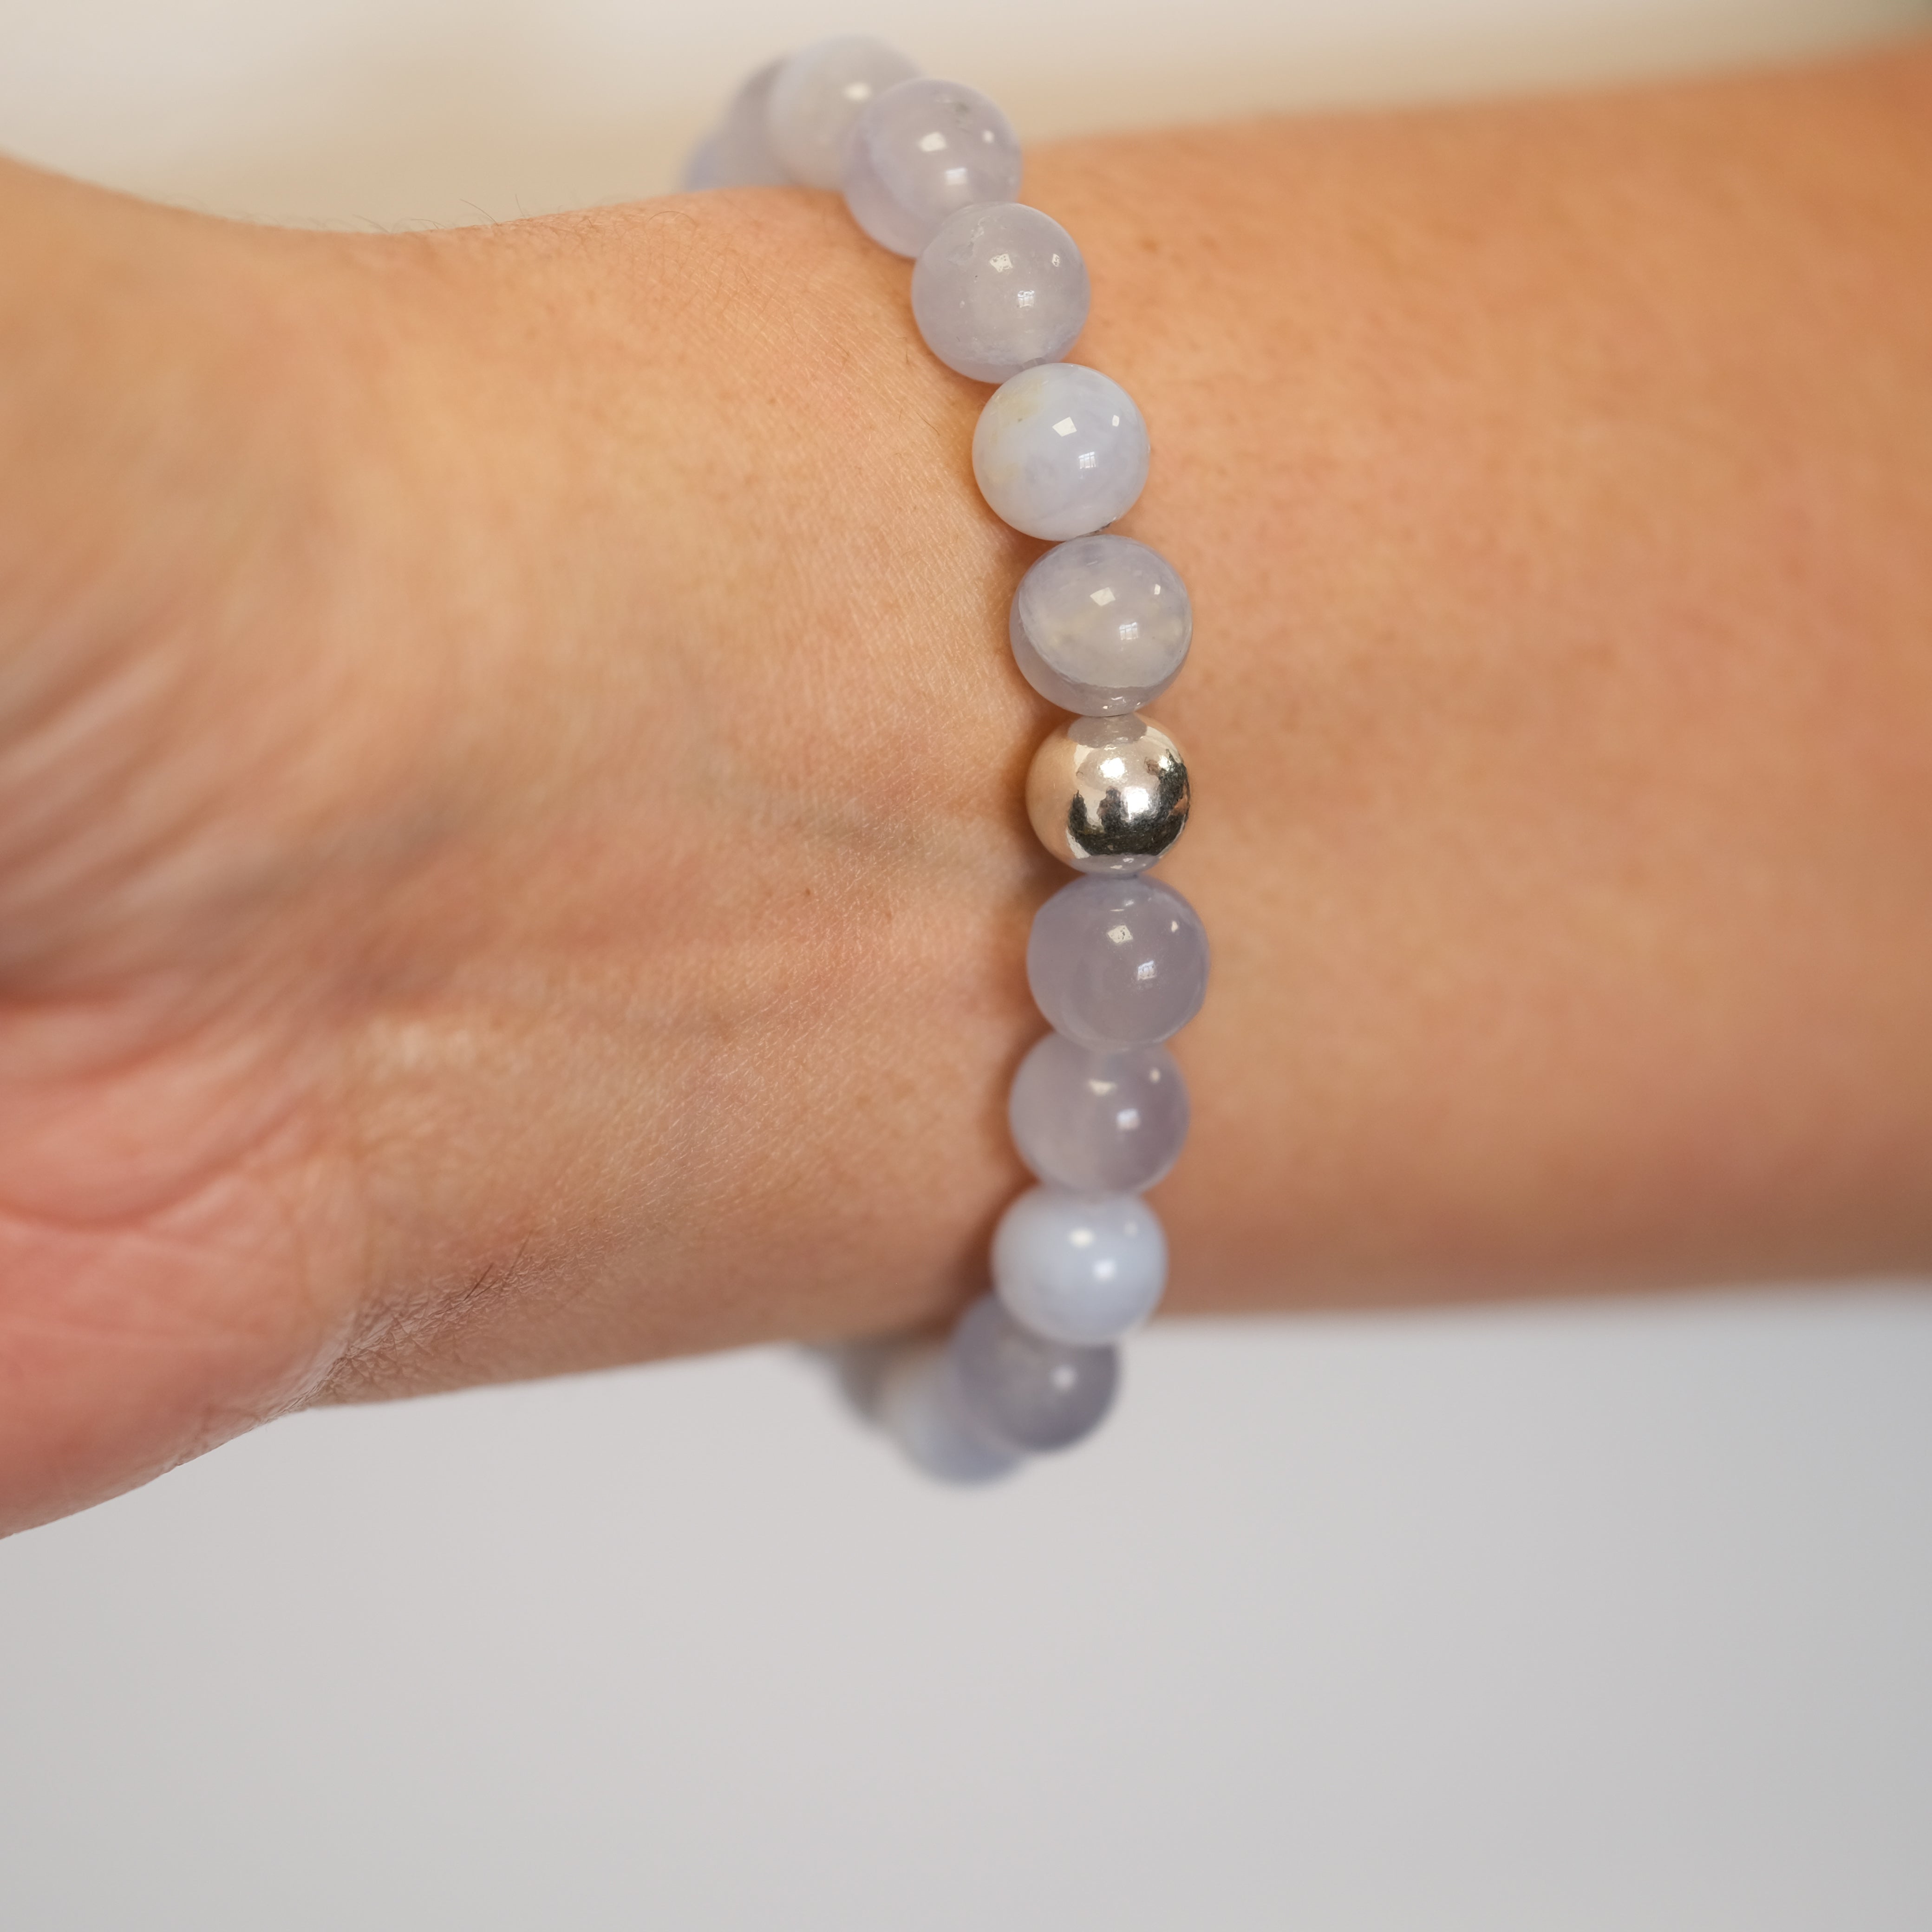 Blue Lace Agate gemstone bracelet in 8mm beads worn on a model's wrist from the back